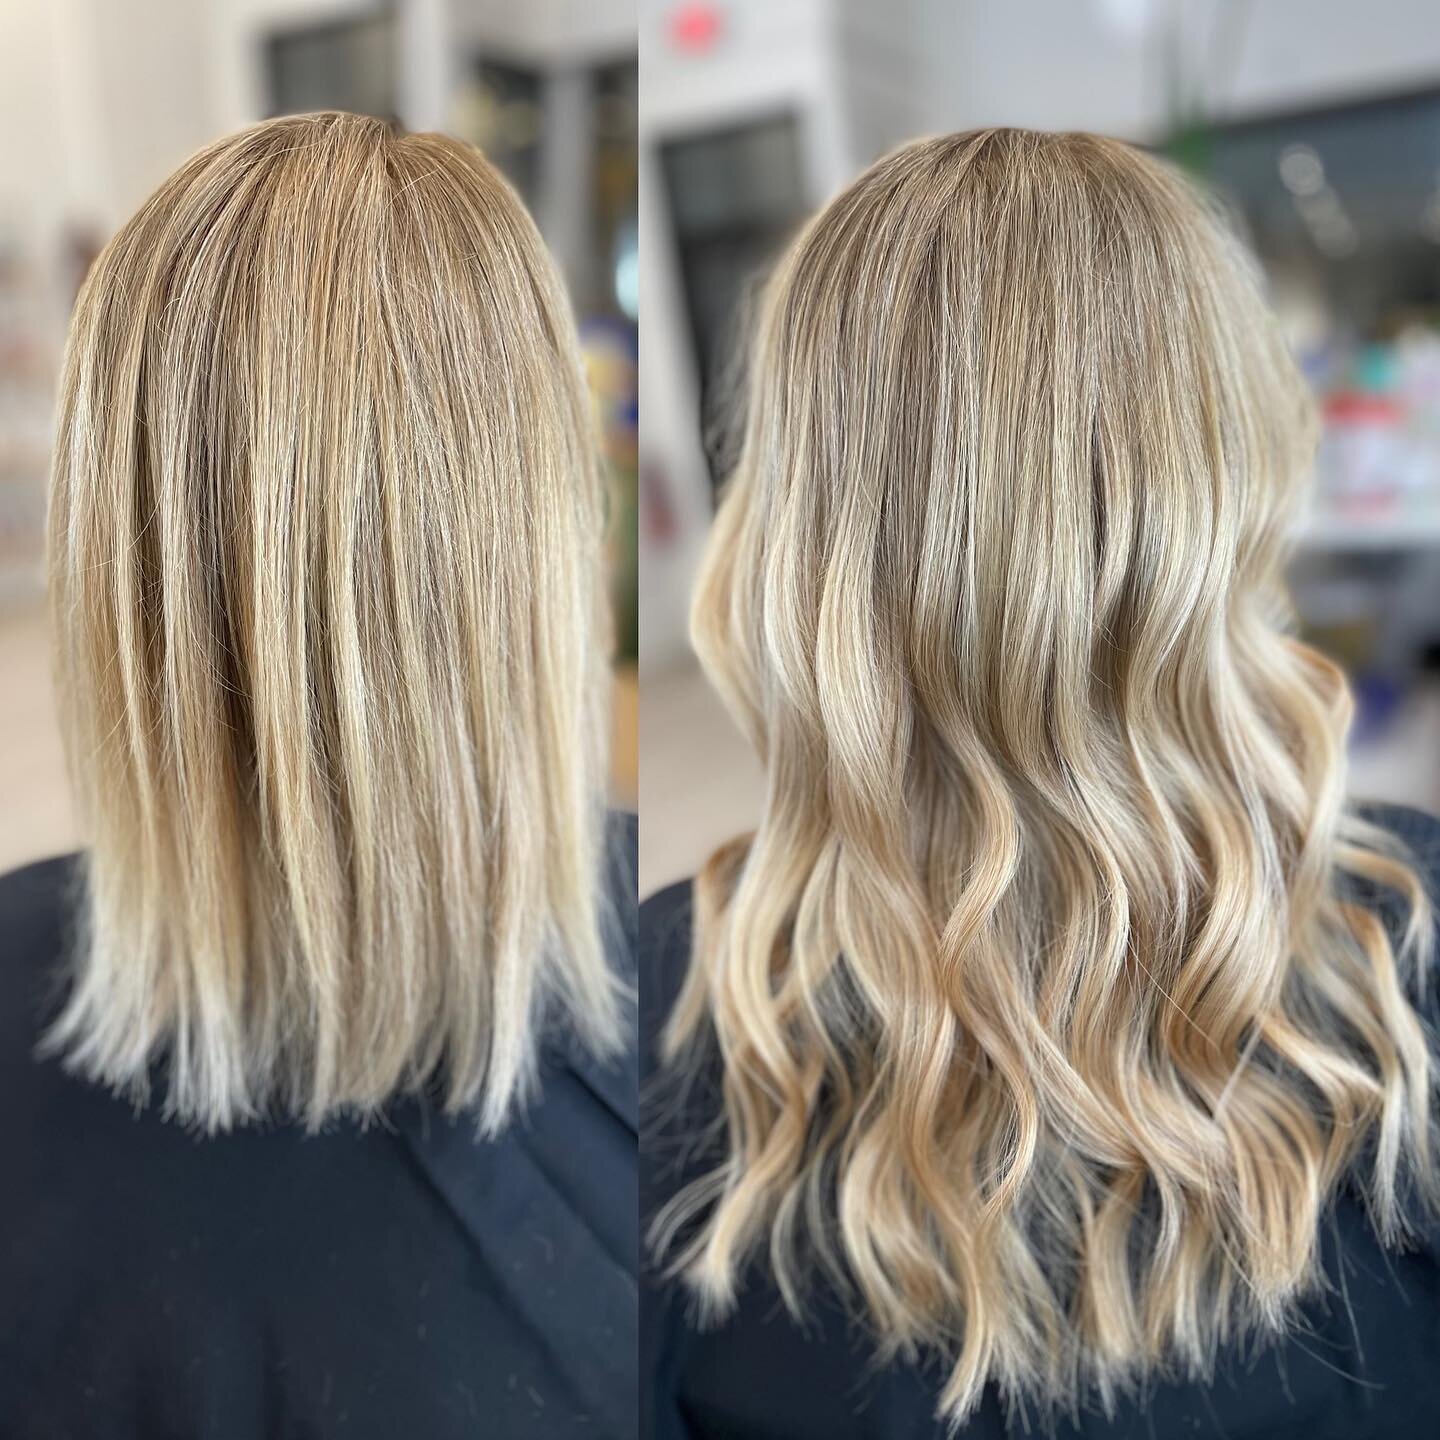 How do you make this beautiful blonde color even better? Add more of it! @itsgoldjen working her extension magic ✨

#staygold #kalamazoosalon #kalamazoohair #blonde #hairtalkextensions #kalamazoohairstylist #goldwell #randco #redkenshadeseq #redkenob